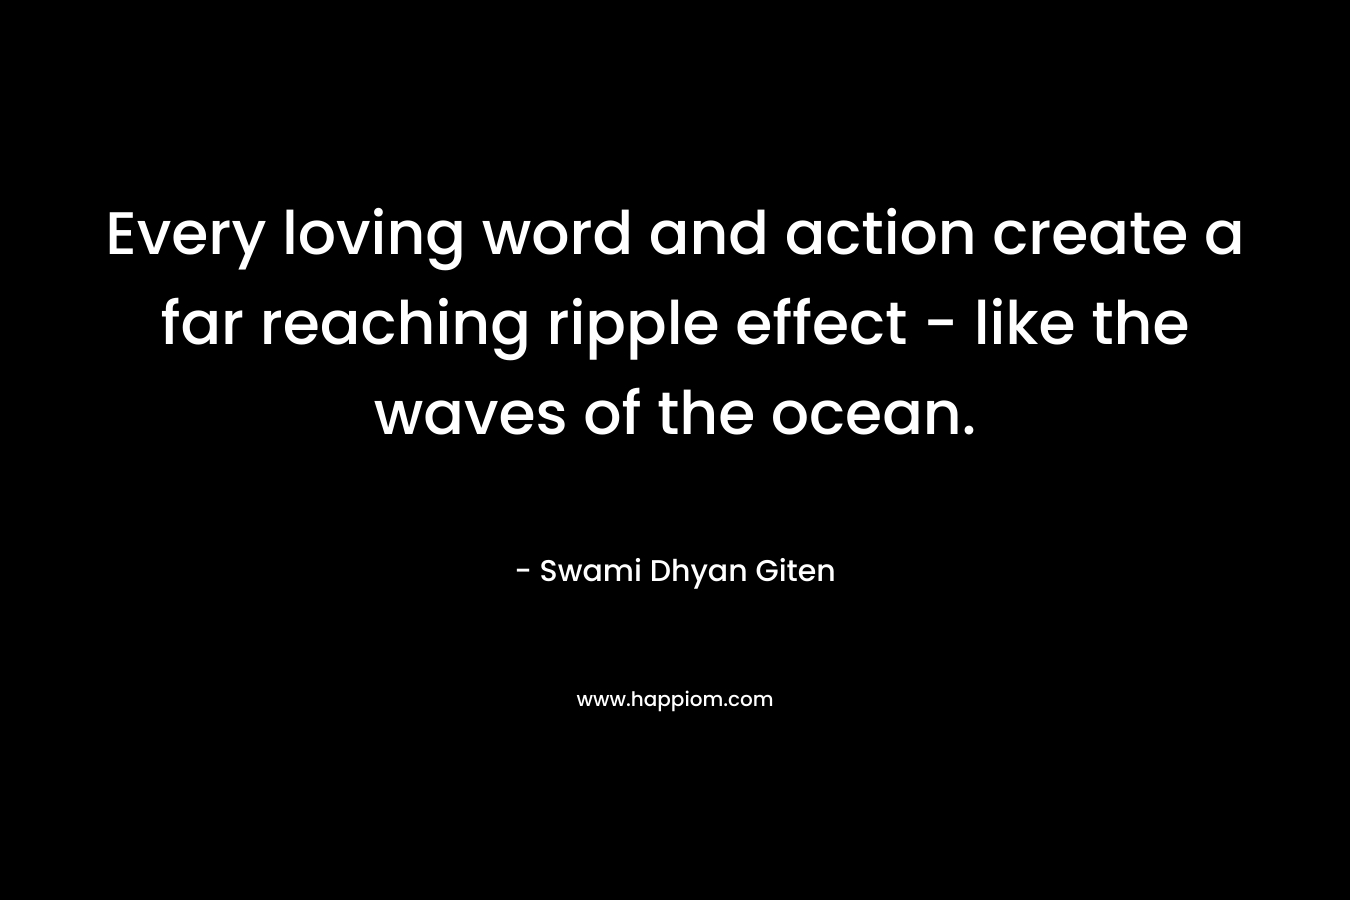 Every loving word and action create a far reaching ripple effect - like the waves of the ocean.